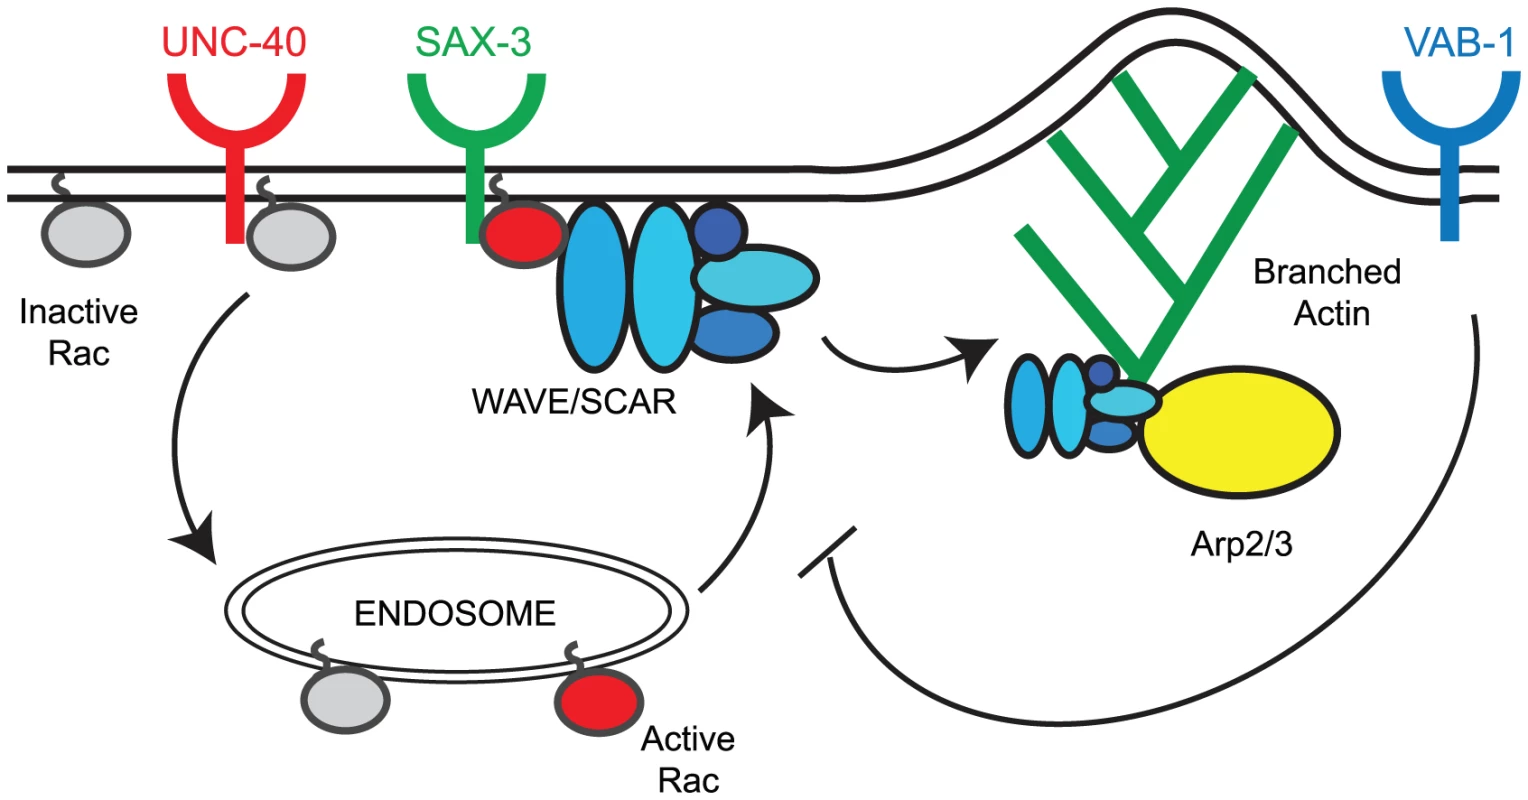 Model for the regulation of the CED-10/Rac1 – WAVE/SCAR – Arp2/3 pathway by axonal guidance receptors.